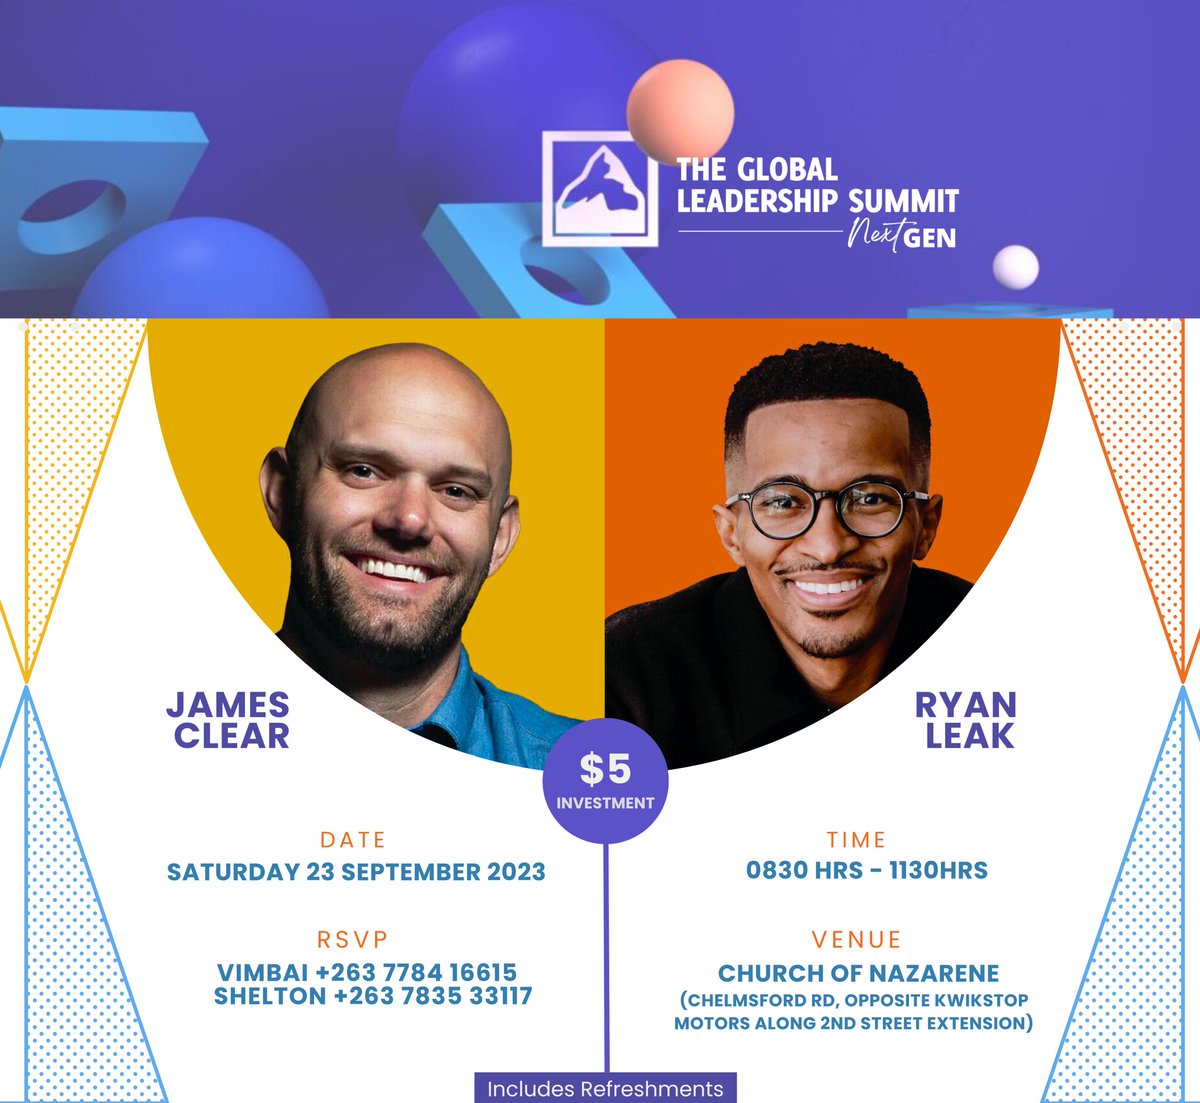 Attention all Youth! 🔊
Register for the GLS Next Gen Summit at the Church of Nazarene.

Date: 23-09-23
Time: 0830hrs to 1130hrs
Speakers: James Clear & Ryan Leak
Investment :$5 (includes refreshments)

RSVP
Vimbai on 0778416615
Shelton on 0783533117

#glsnextgen #GLS23  #glszim